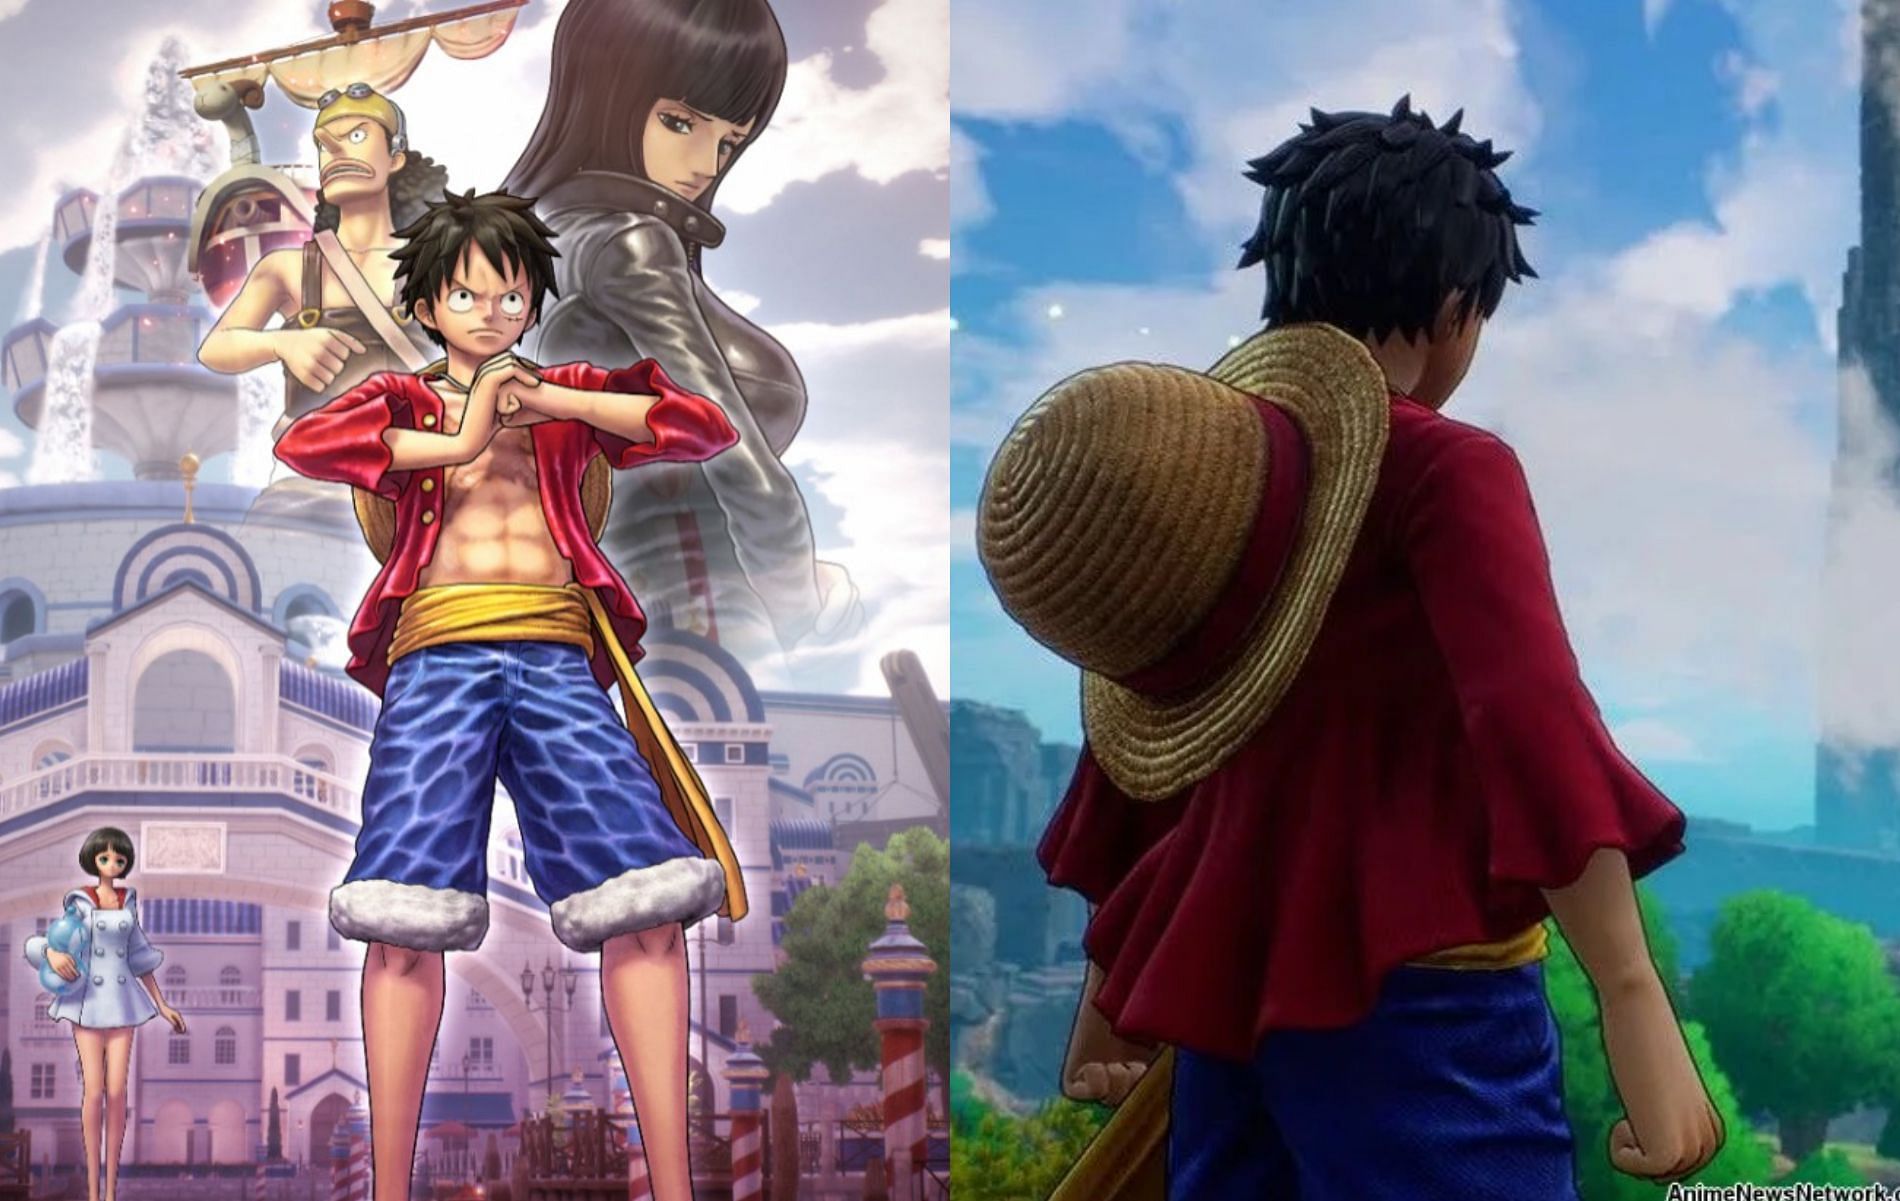 Fact Check: Is One Piece Odyssey on Xbox Game Pass?